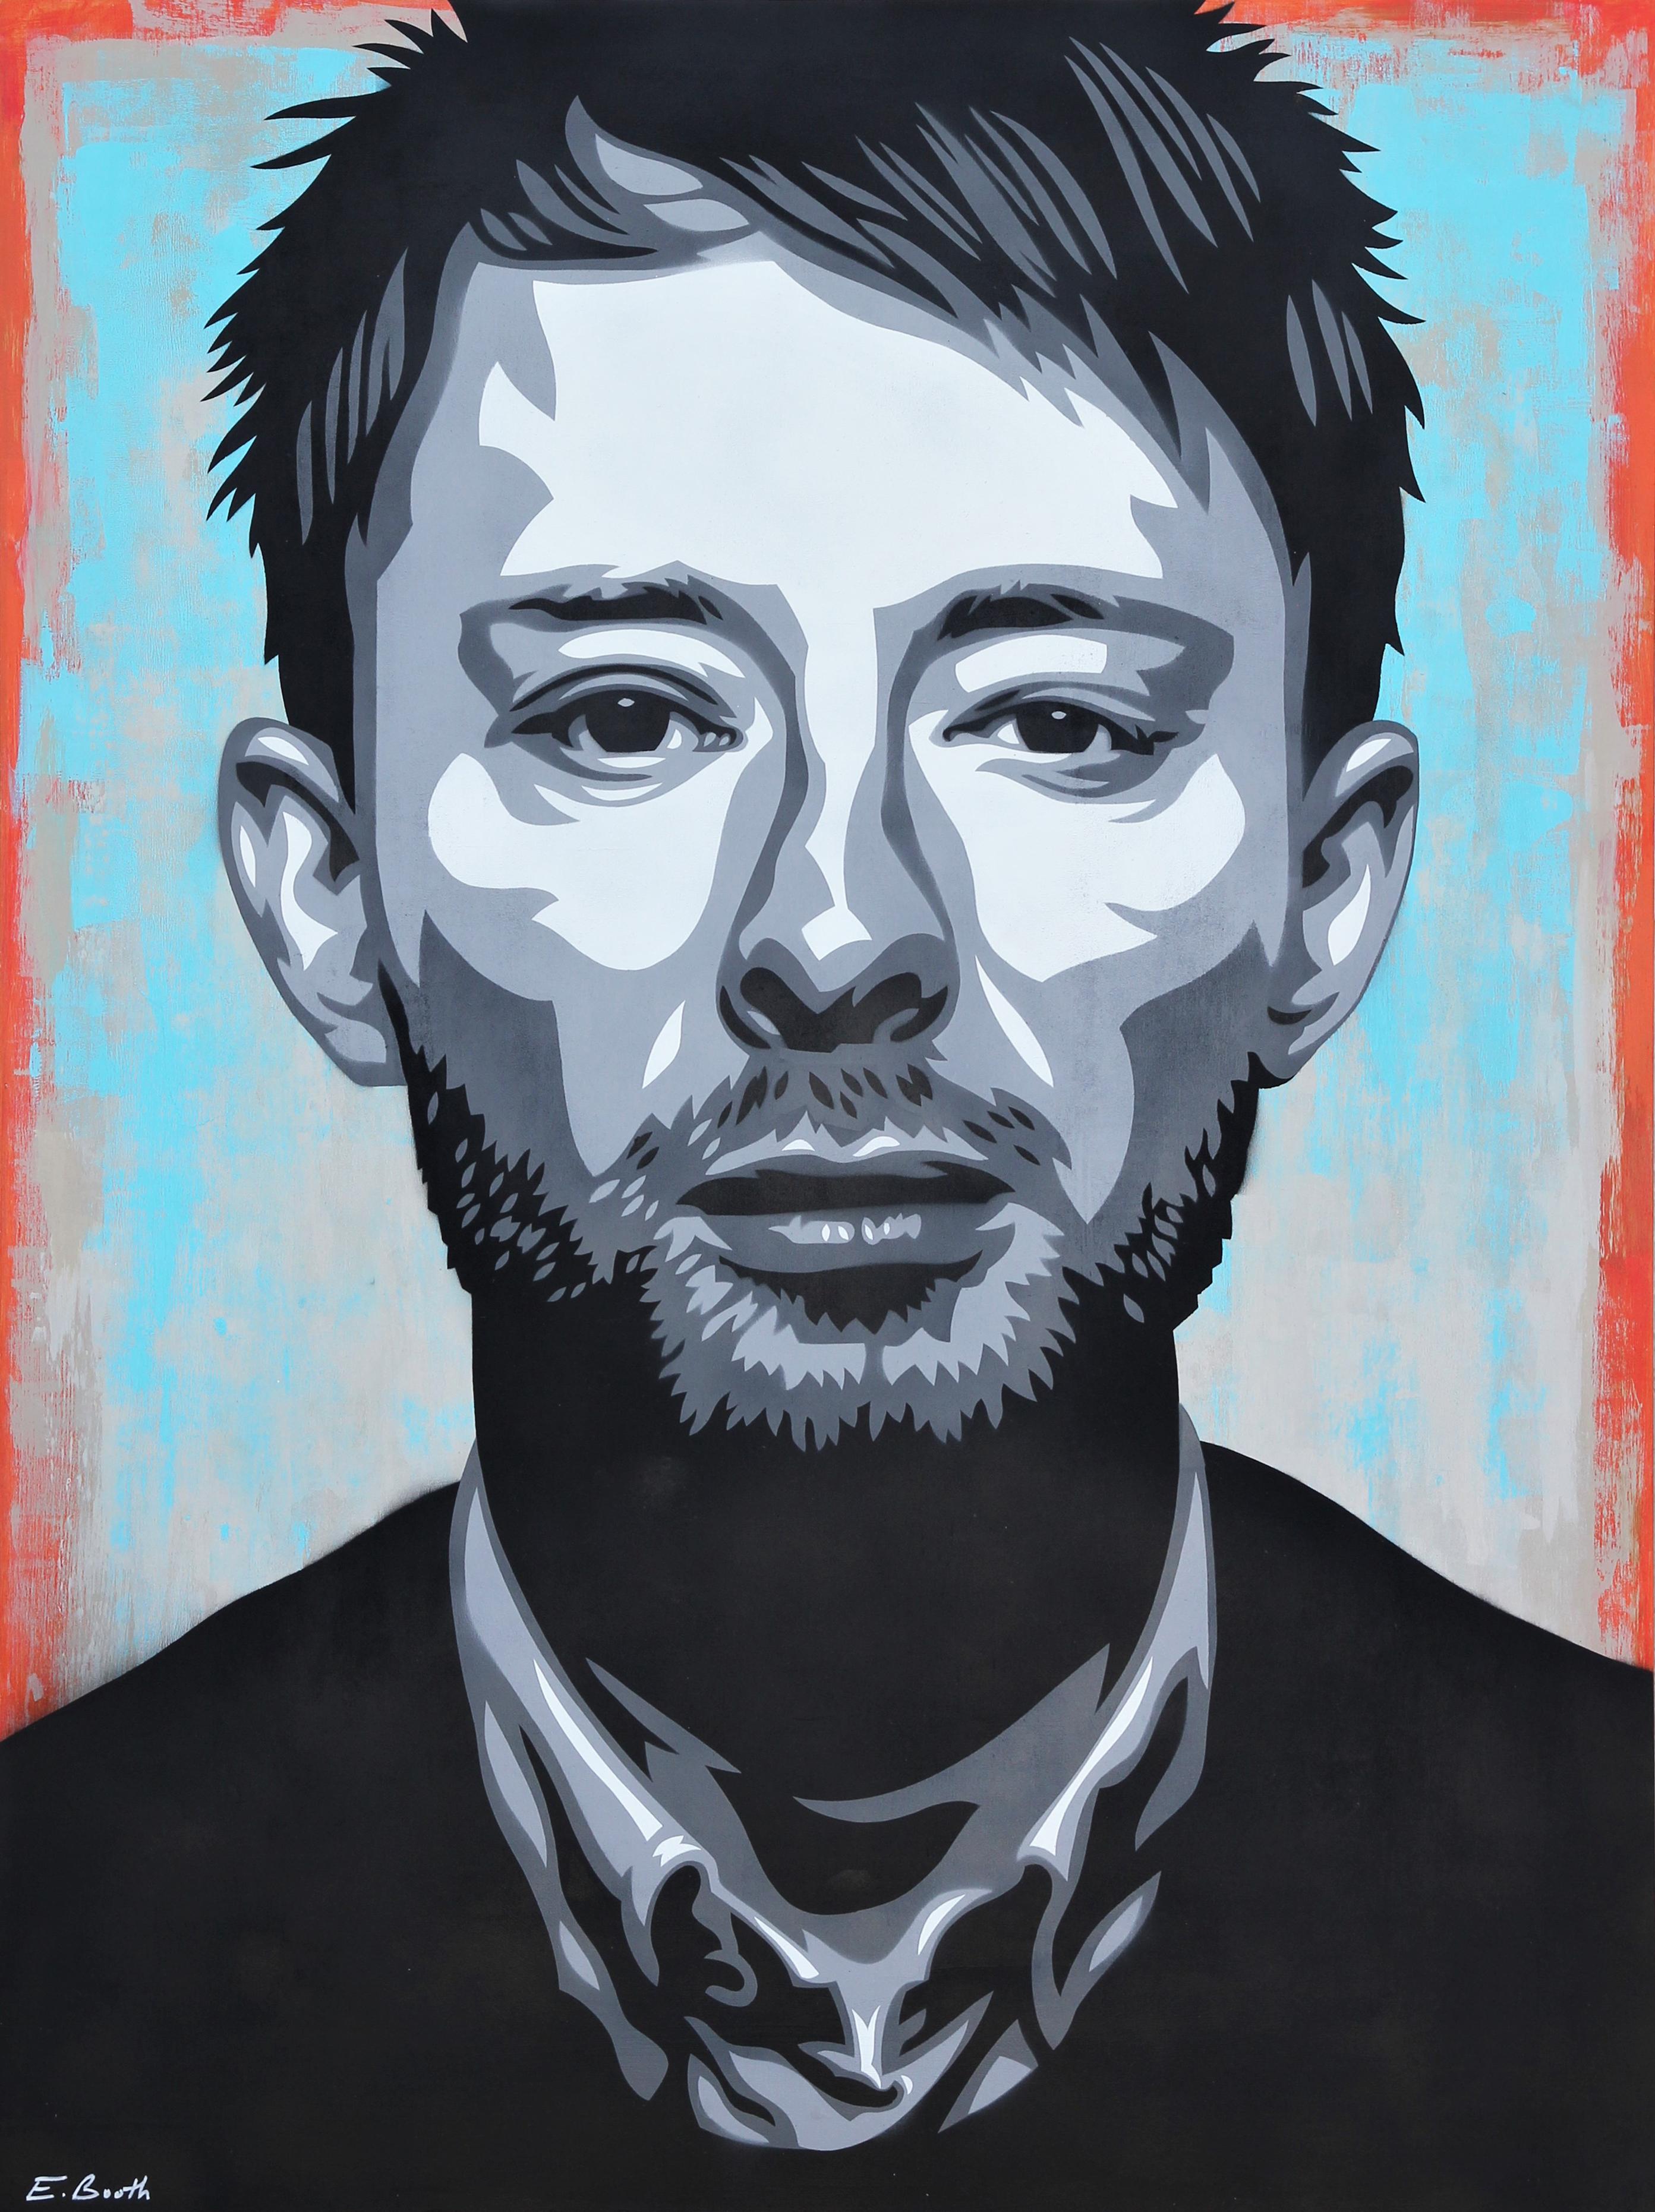 Thom Yorke “House of Cards” Teal, Red, and Black Contemporary Abstract Portrait